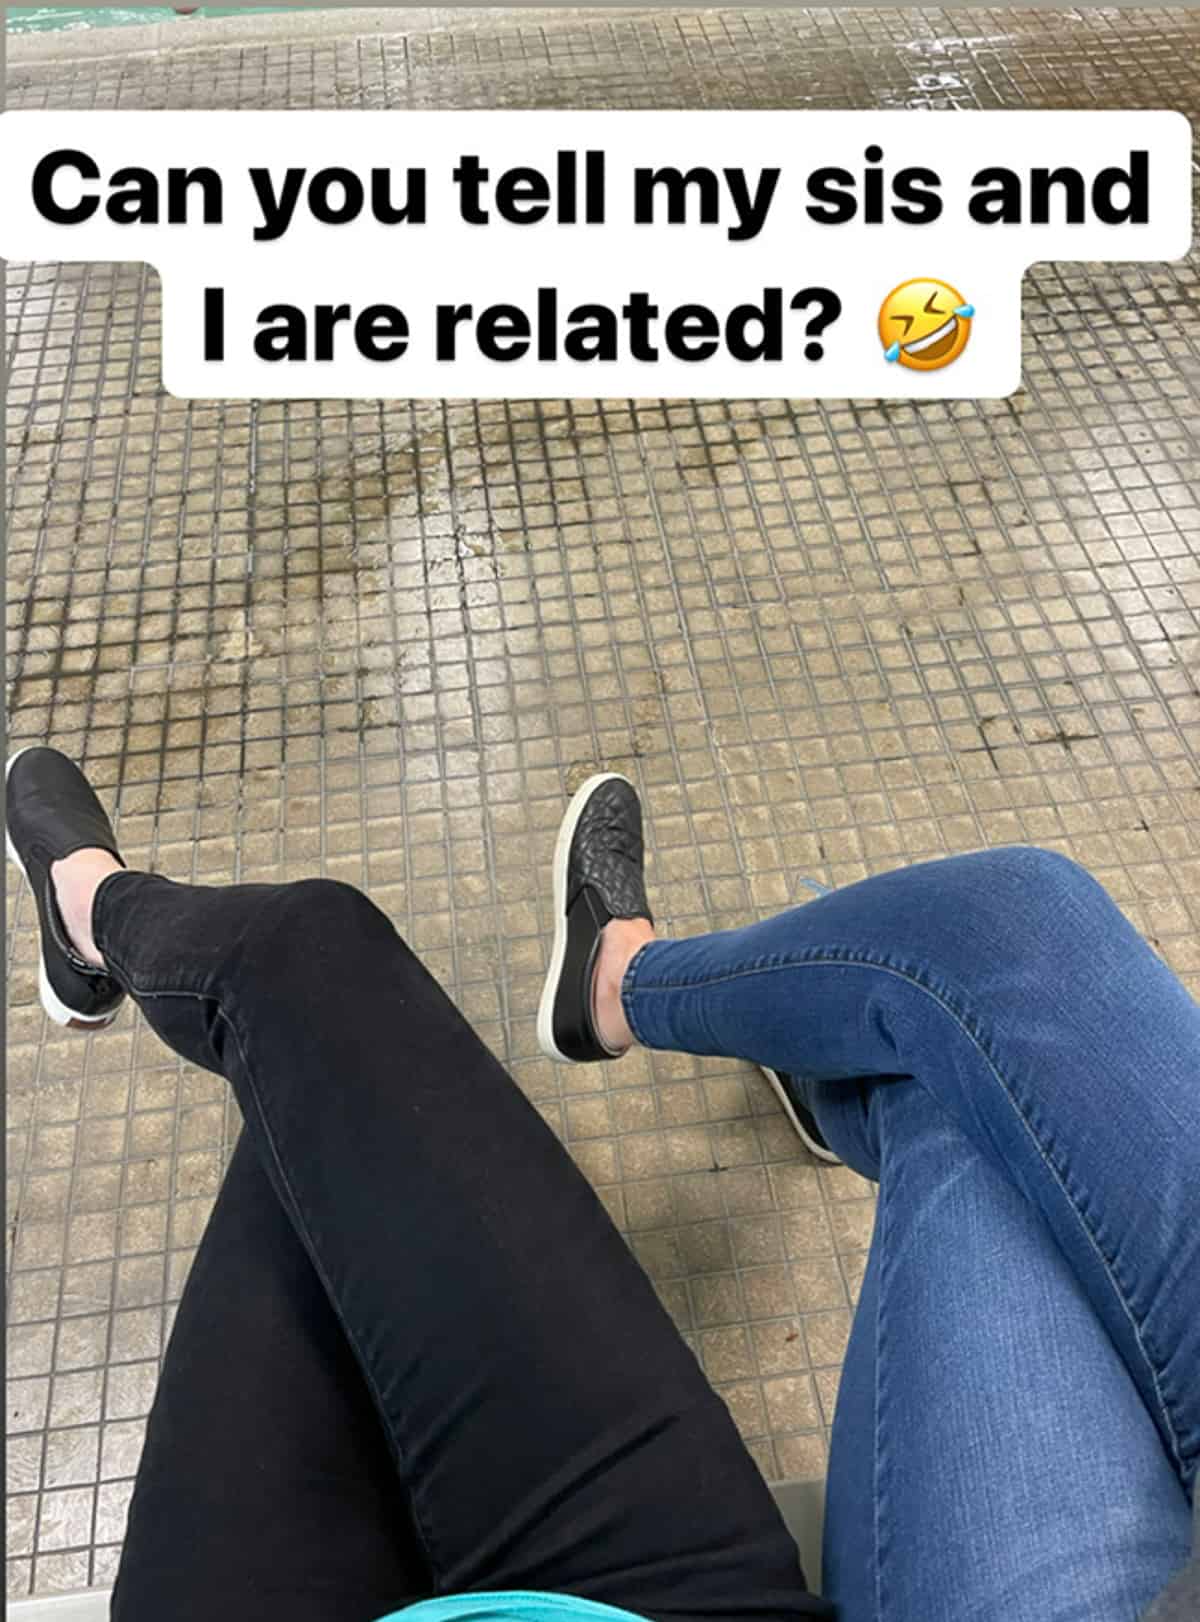 2 women wearing the same shoes with their legs crossed in the exact same way.